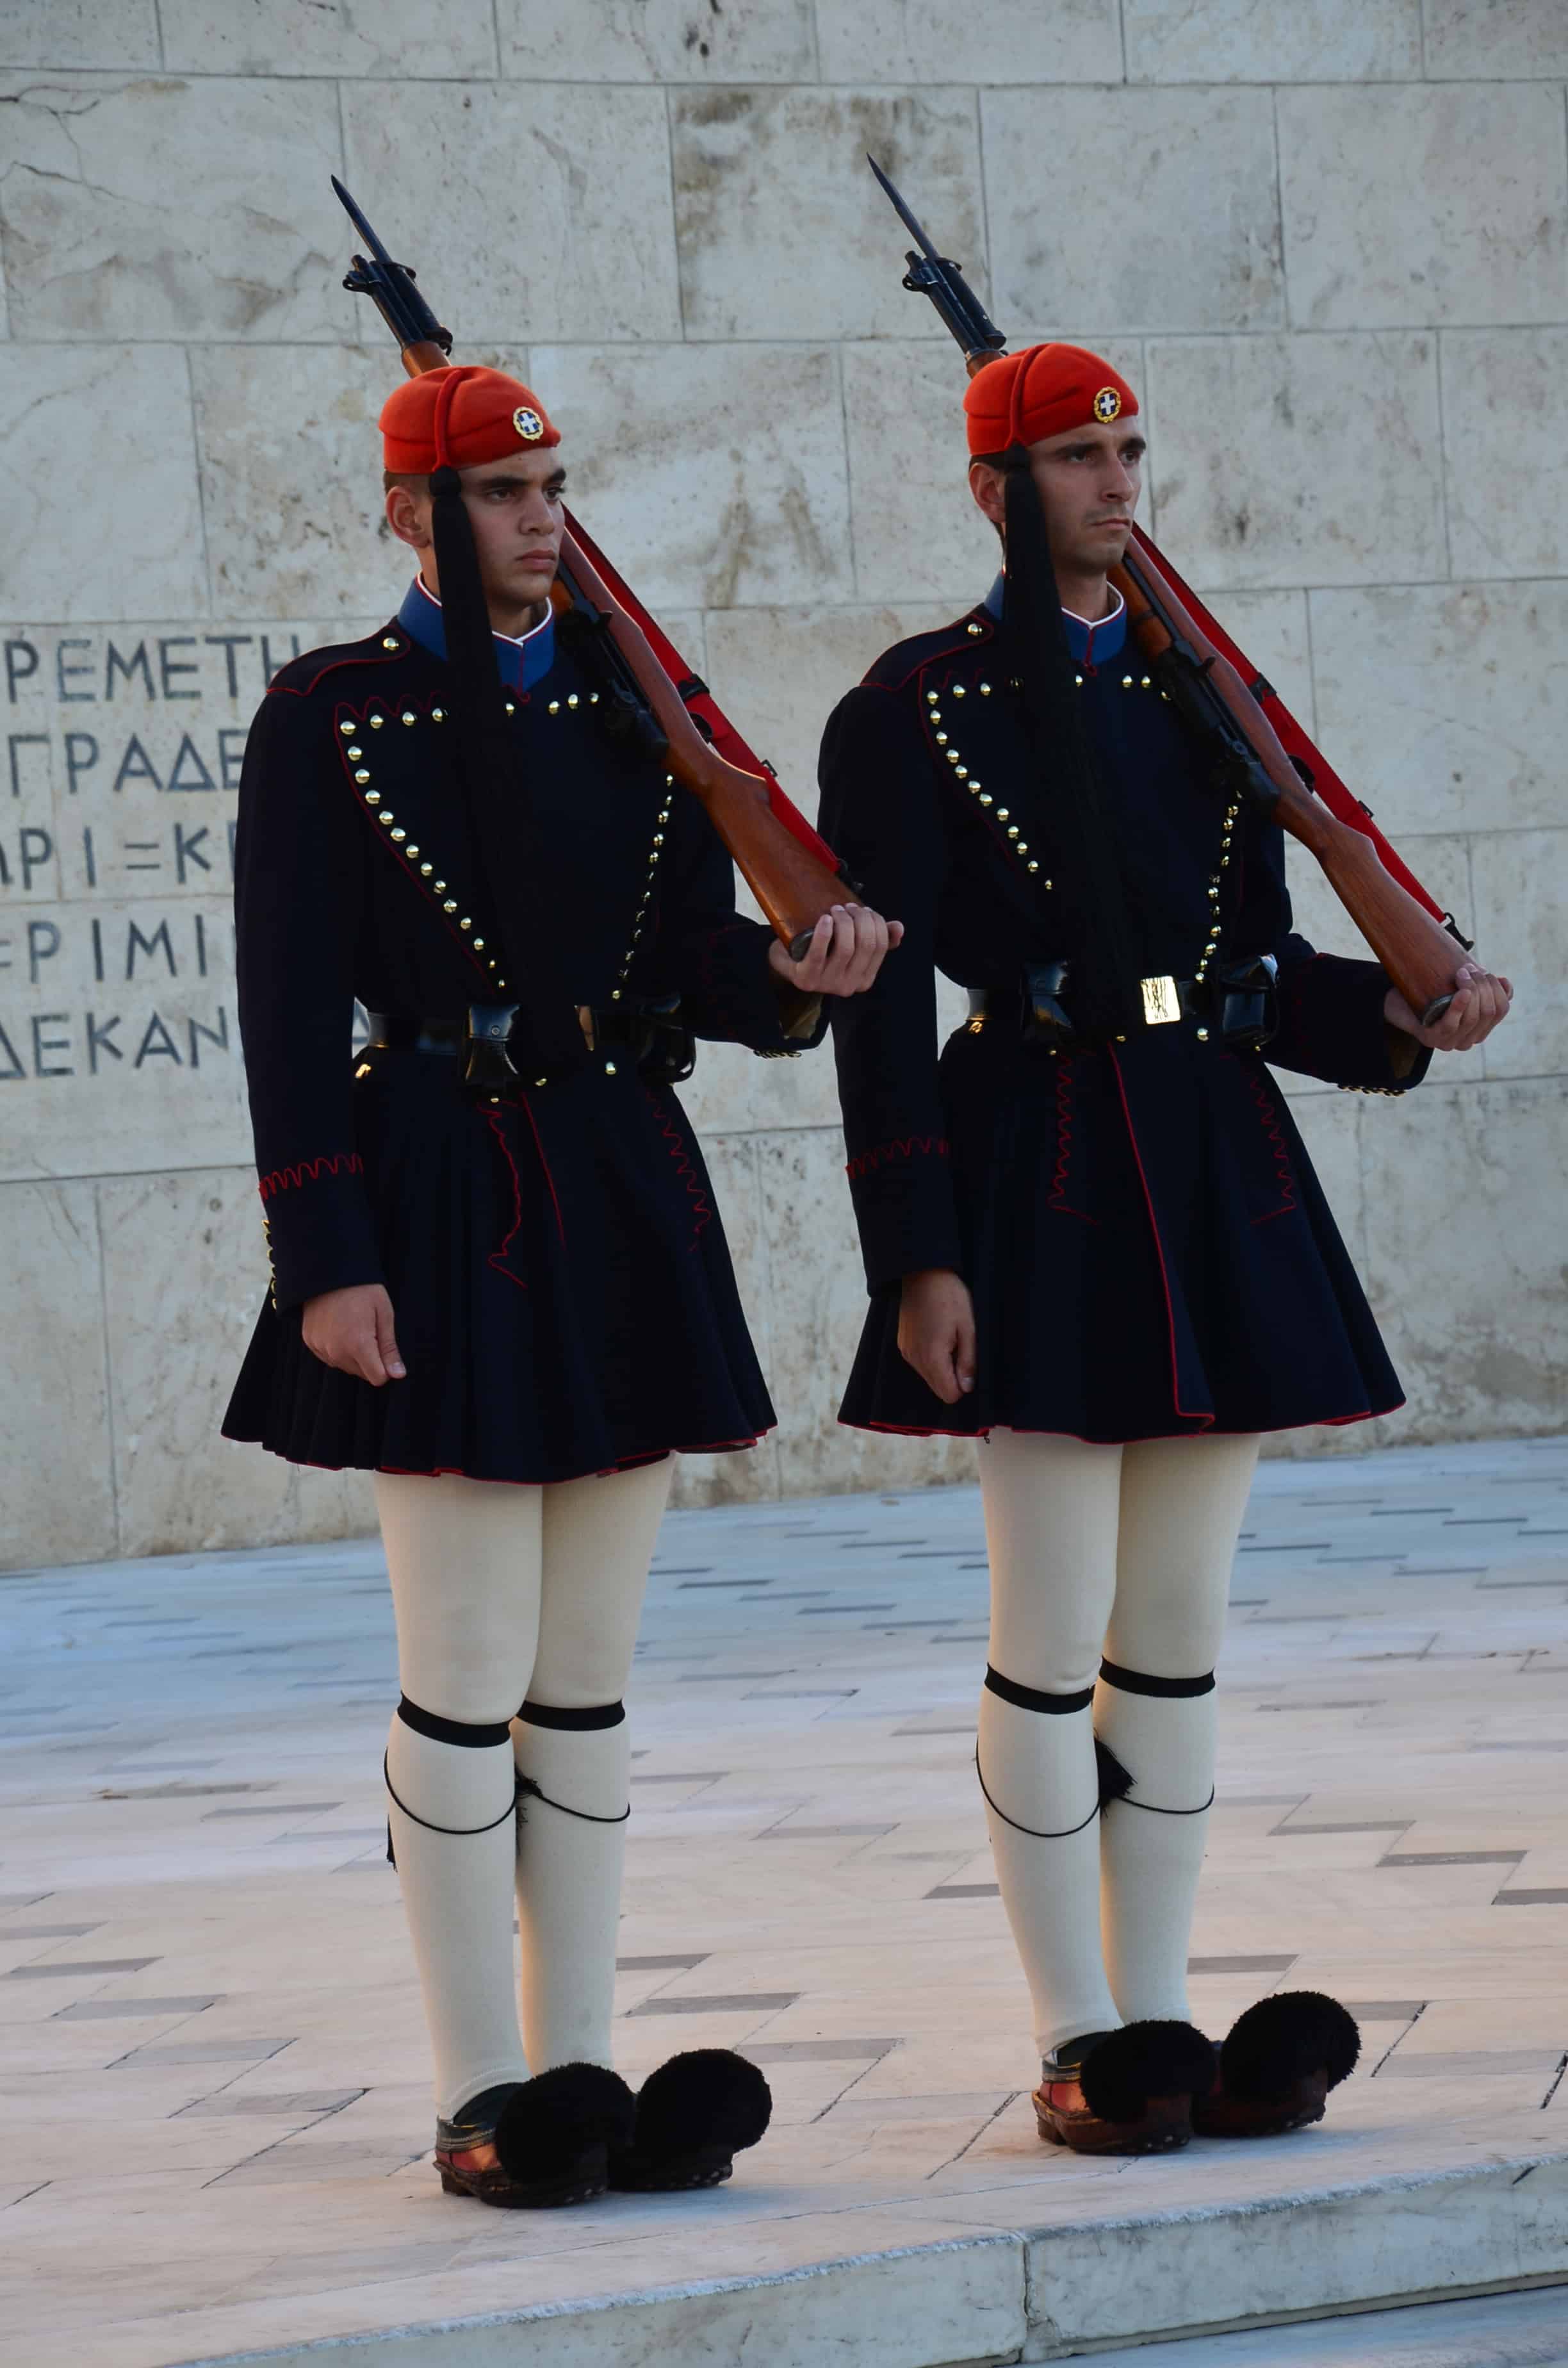 Evzones at the Tomb of the Unknown Soldier in Athens, Greece